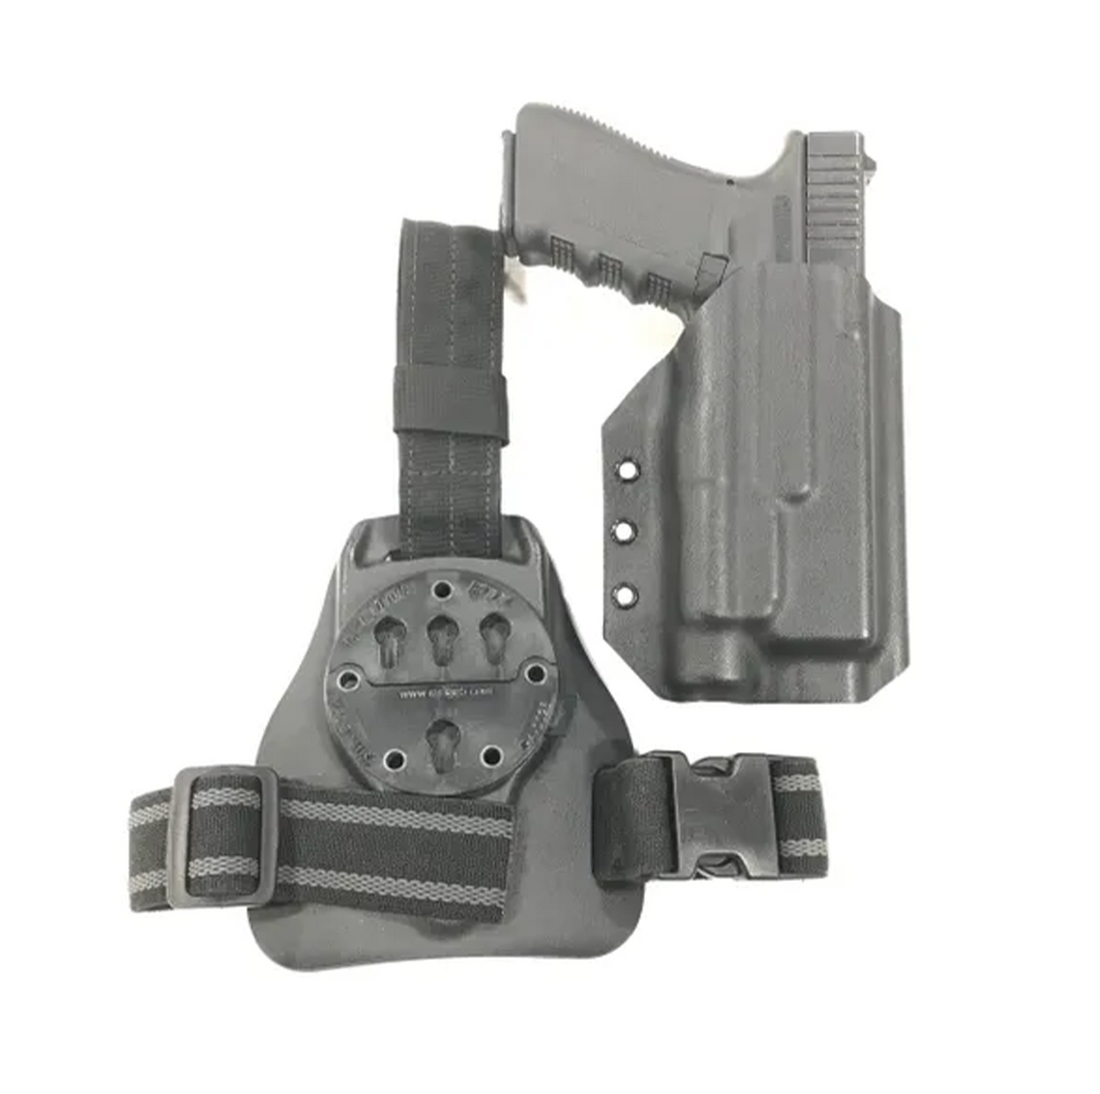 Palmetto State Armory Freedom Drop Leg Holsters